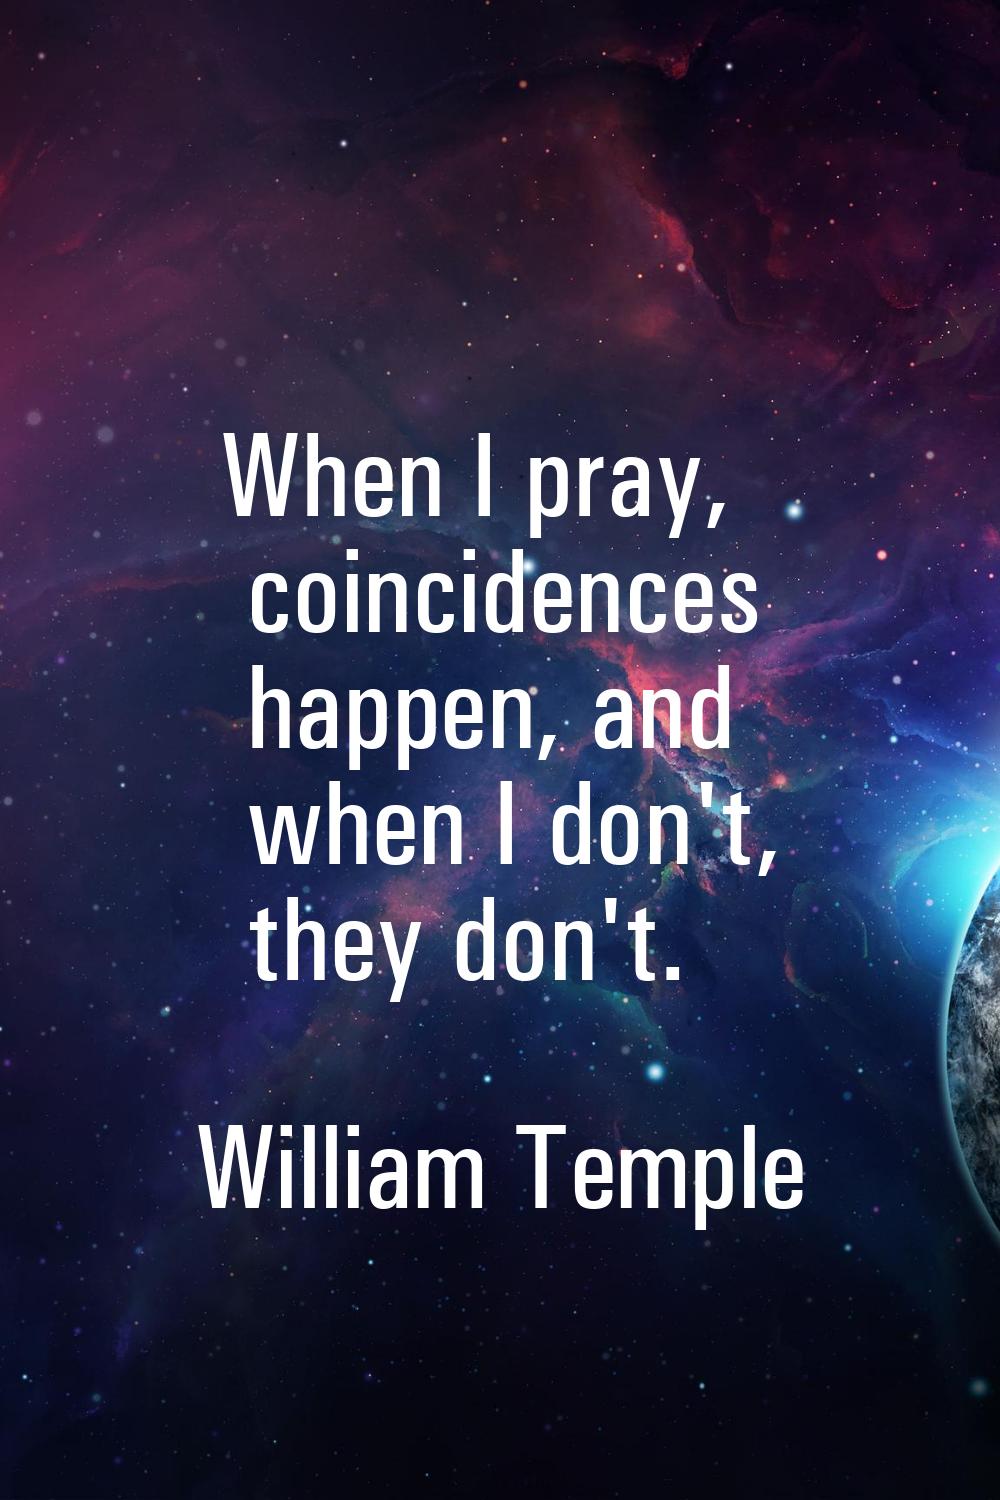 When I pray, coincidences happen, and when I don't, they don't.